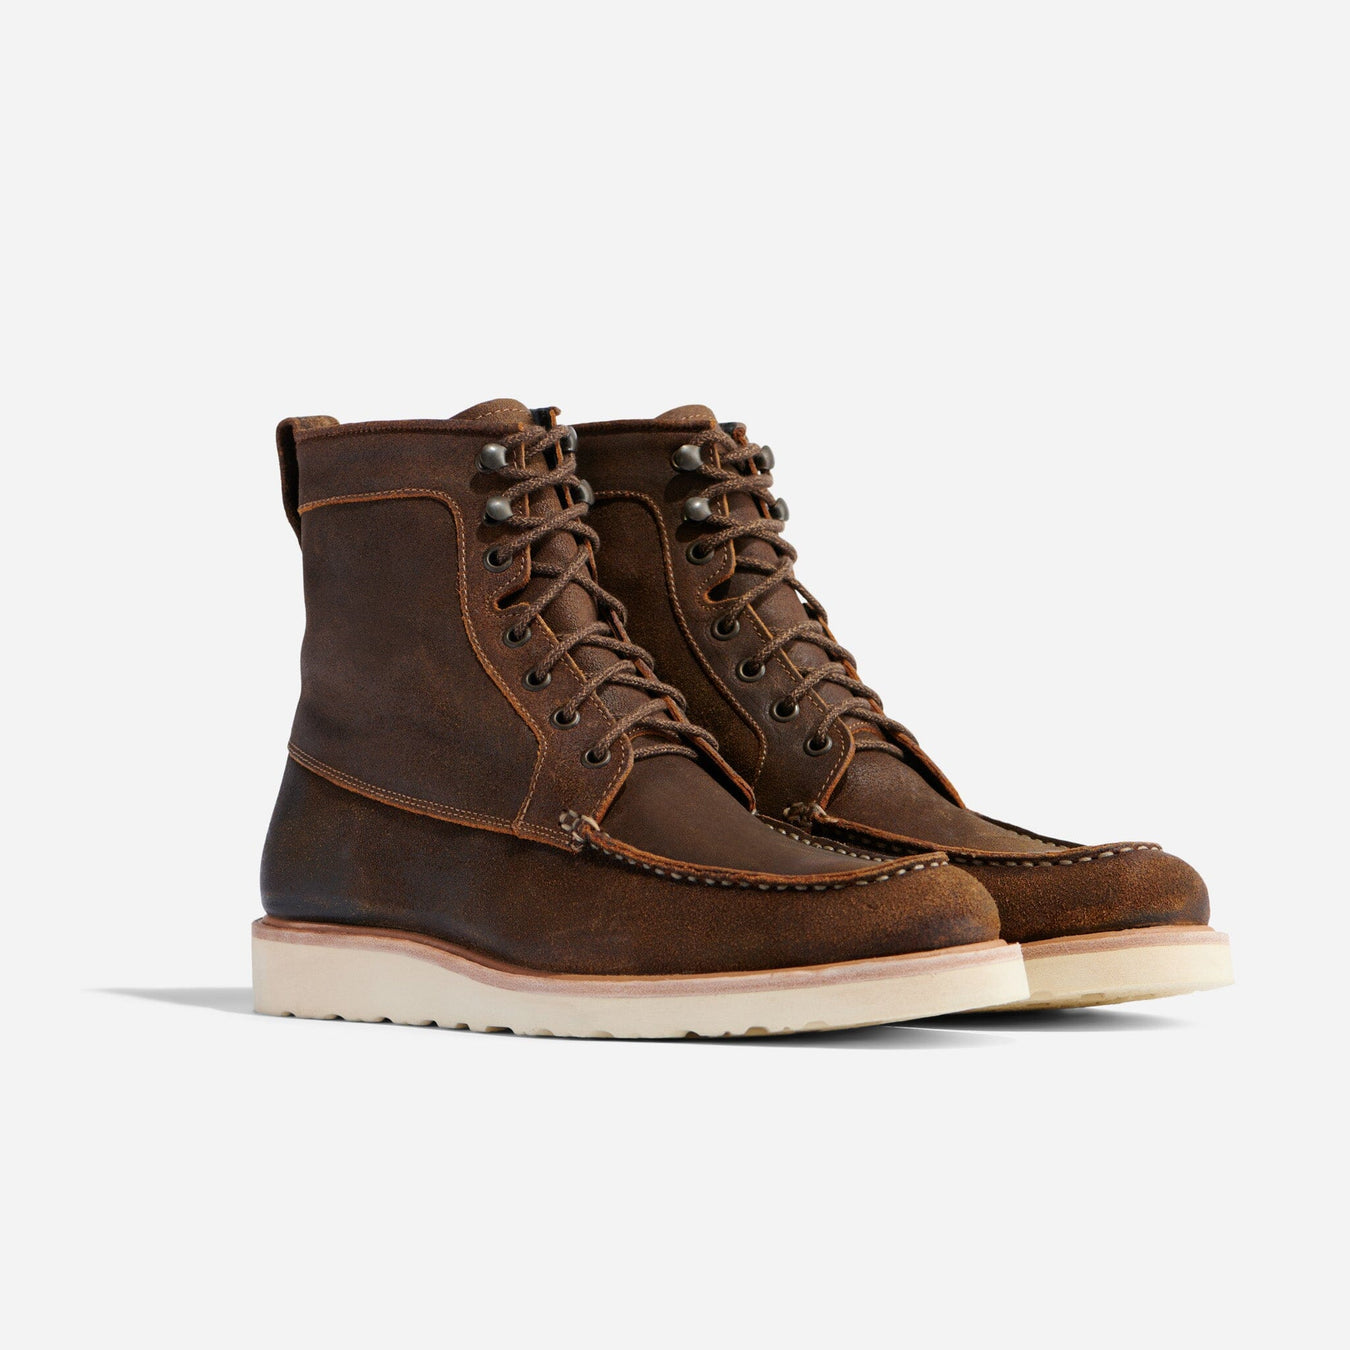 All-Weather Mateo Boot